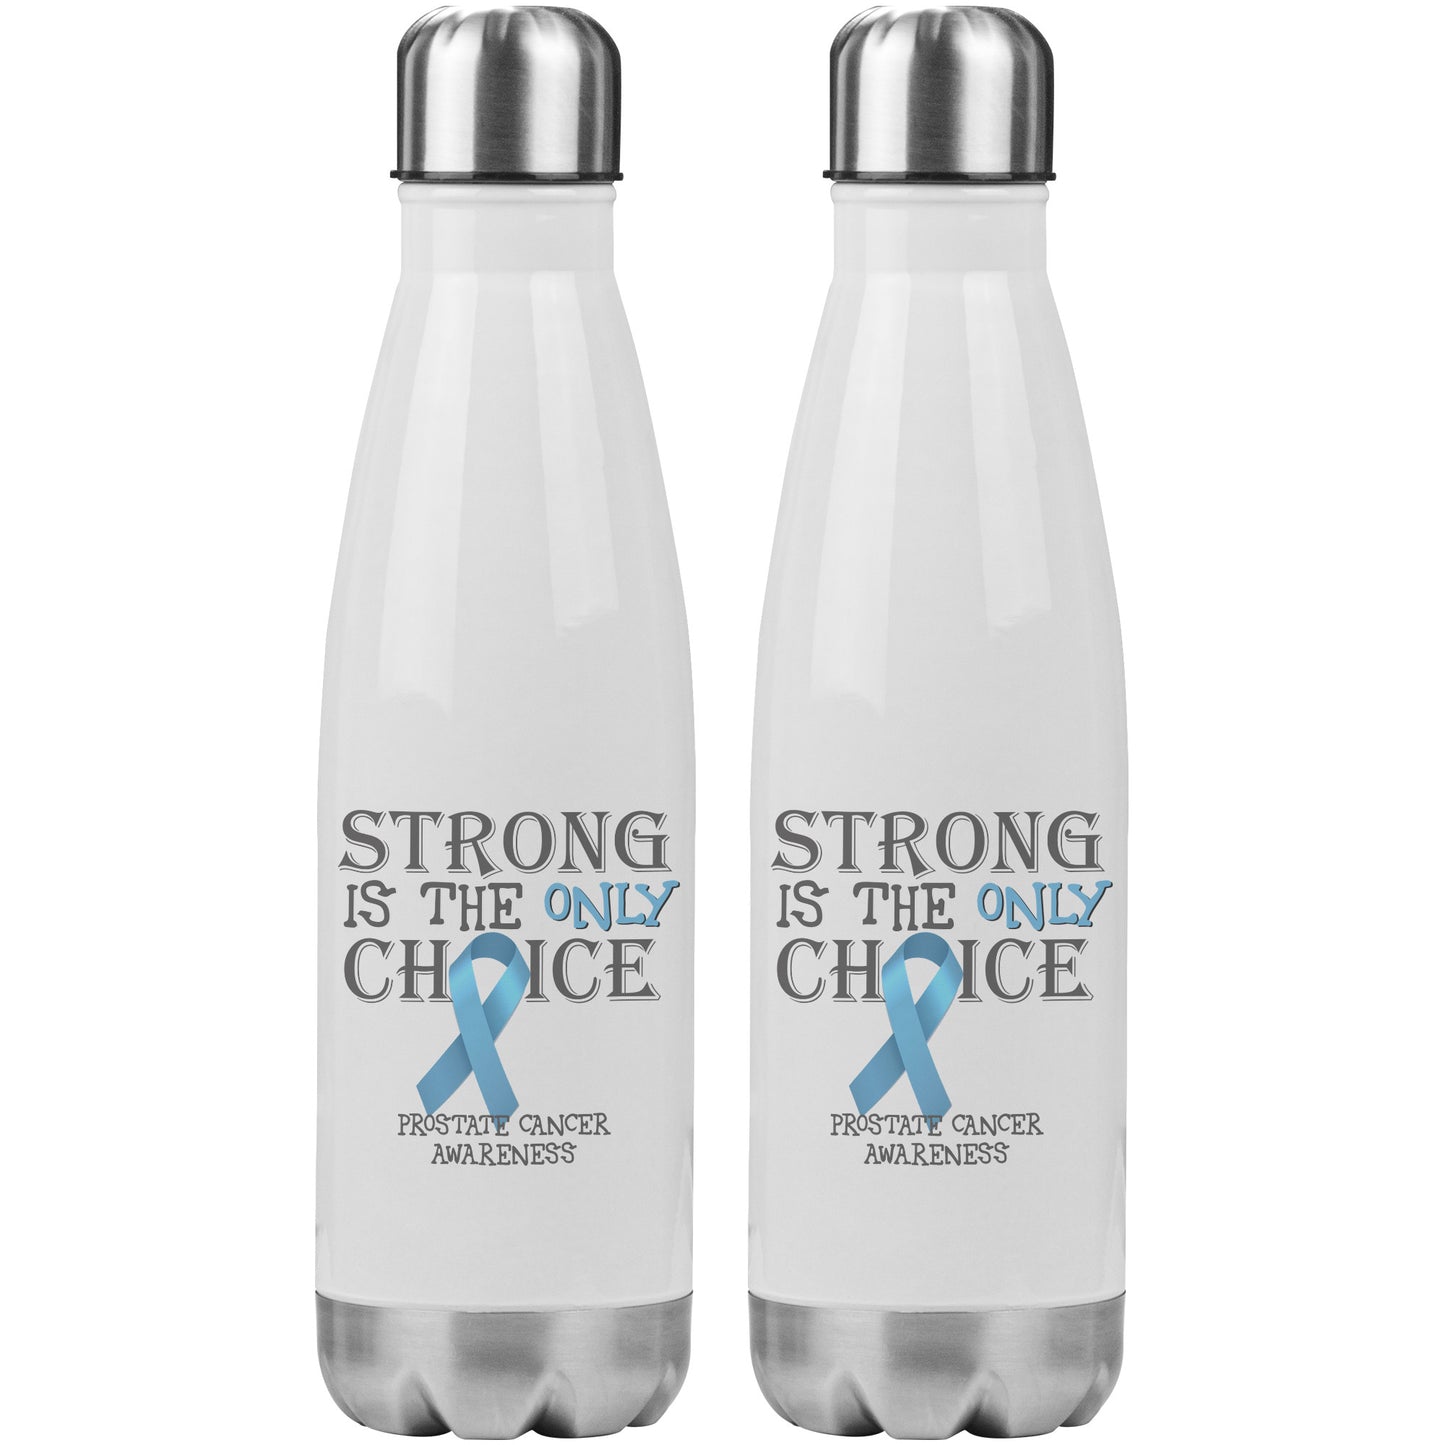 Strong is the Only Choice -Prostate Cancer Awareness 20oz Insulated Water Bottle